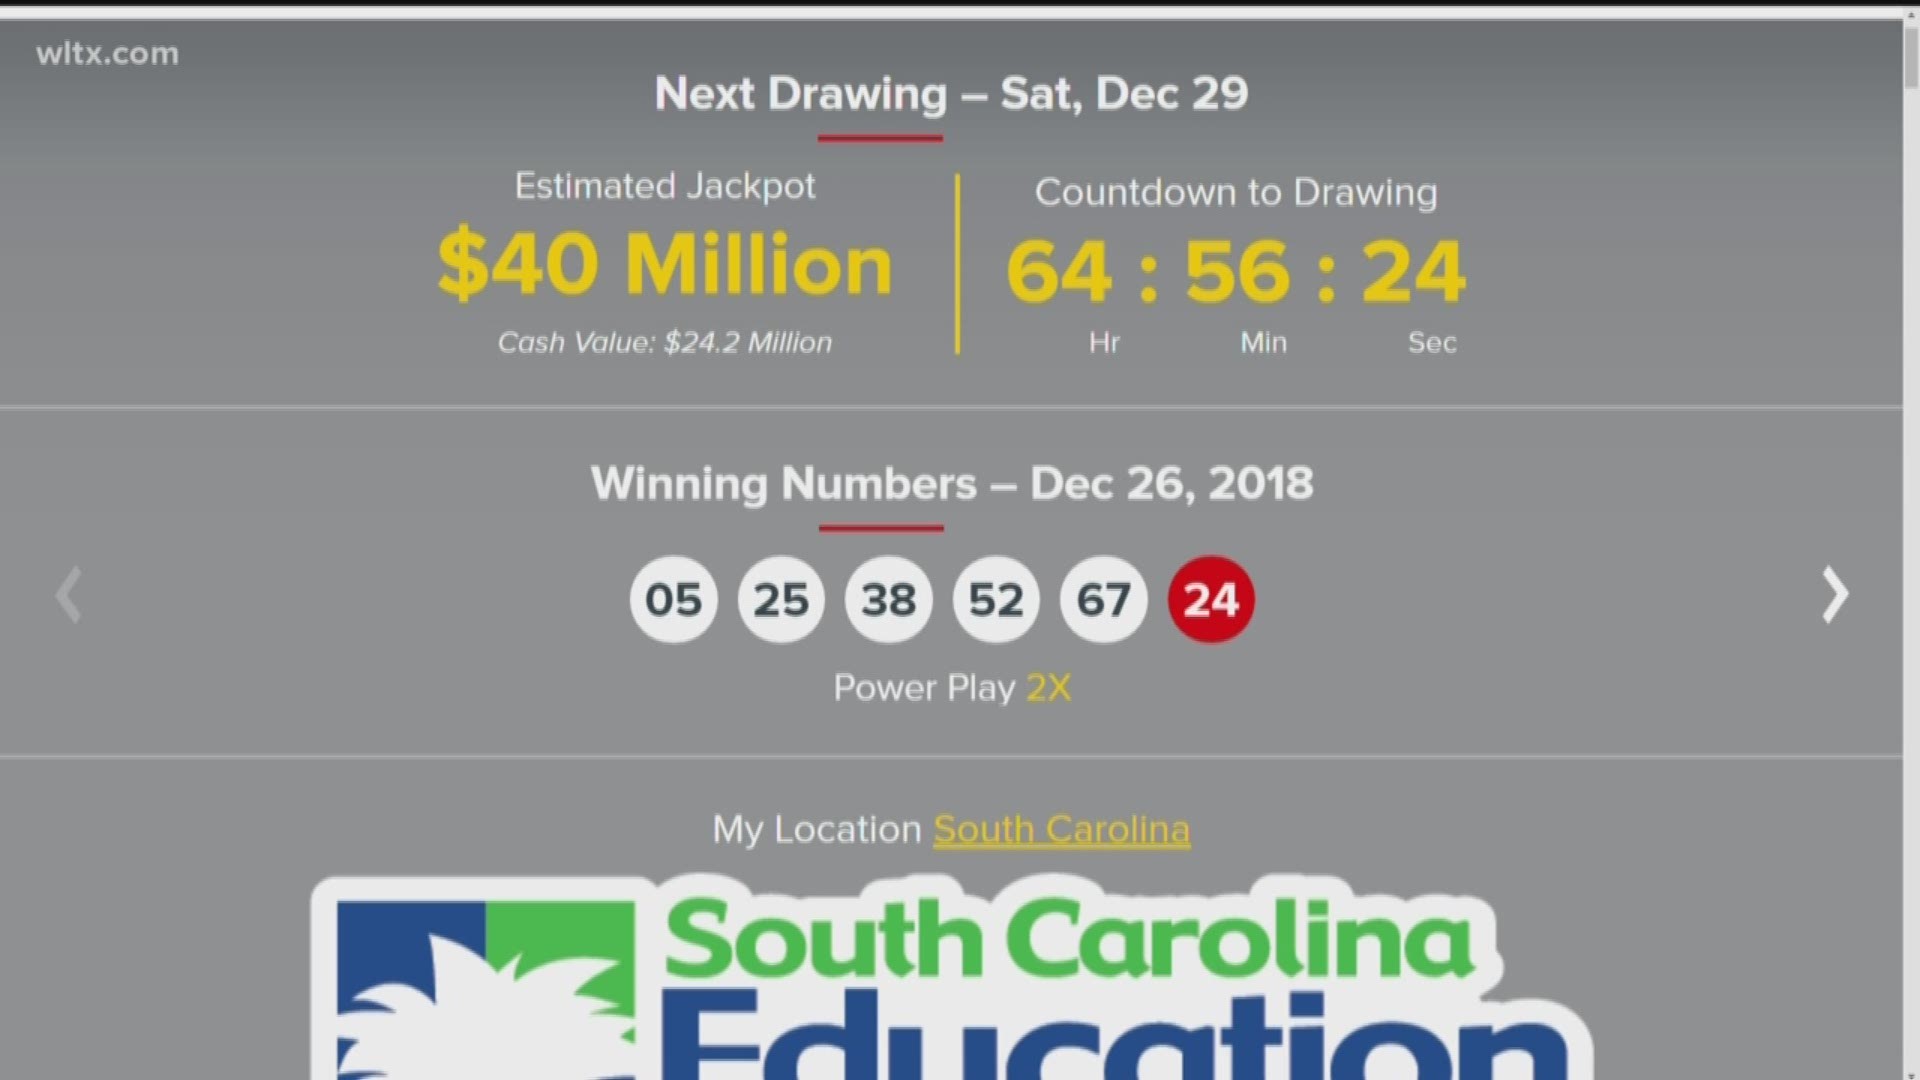 A lucky person from New York won the big Powerball jackpot, but someone from South Carolina won a $50 thousand prize.